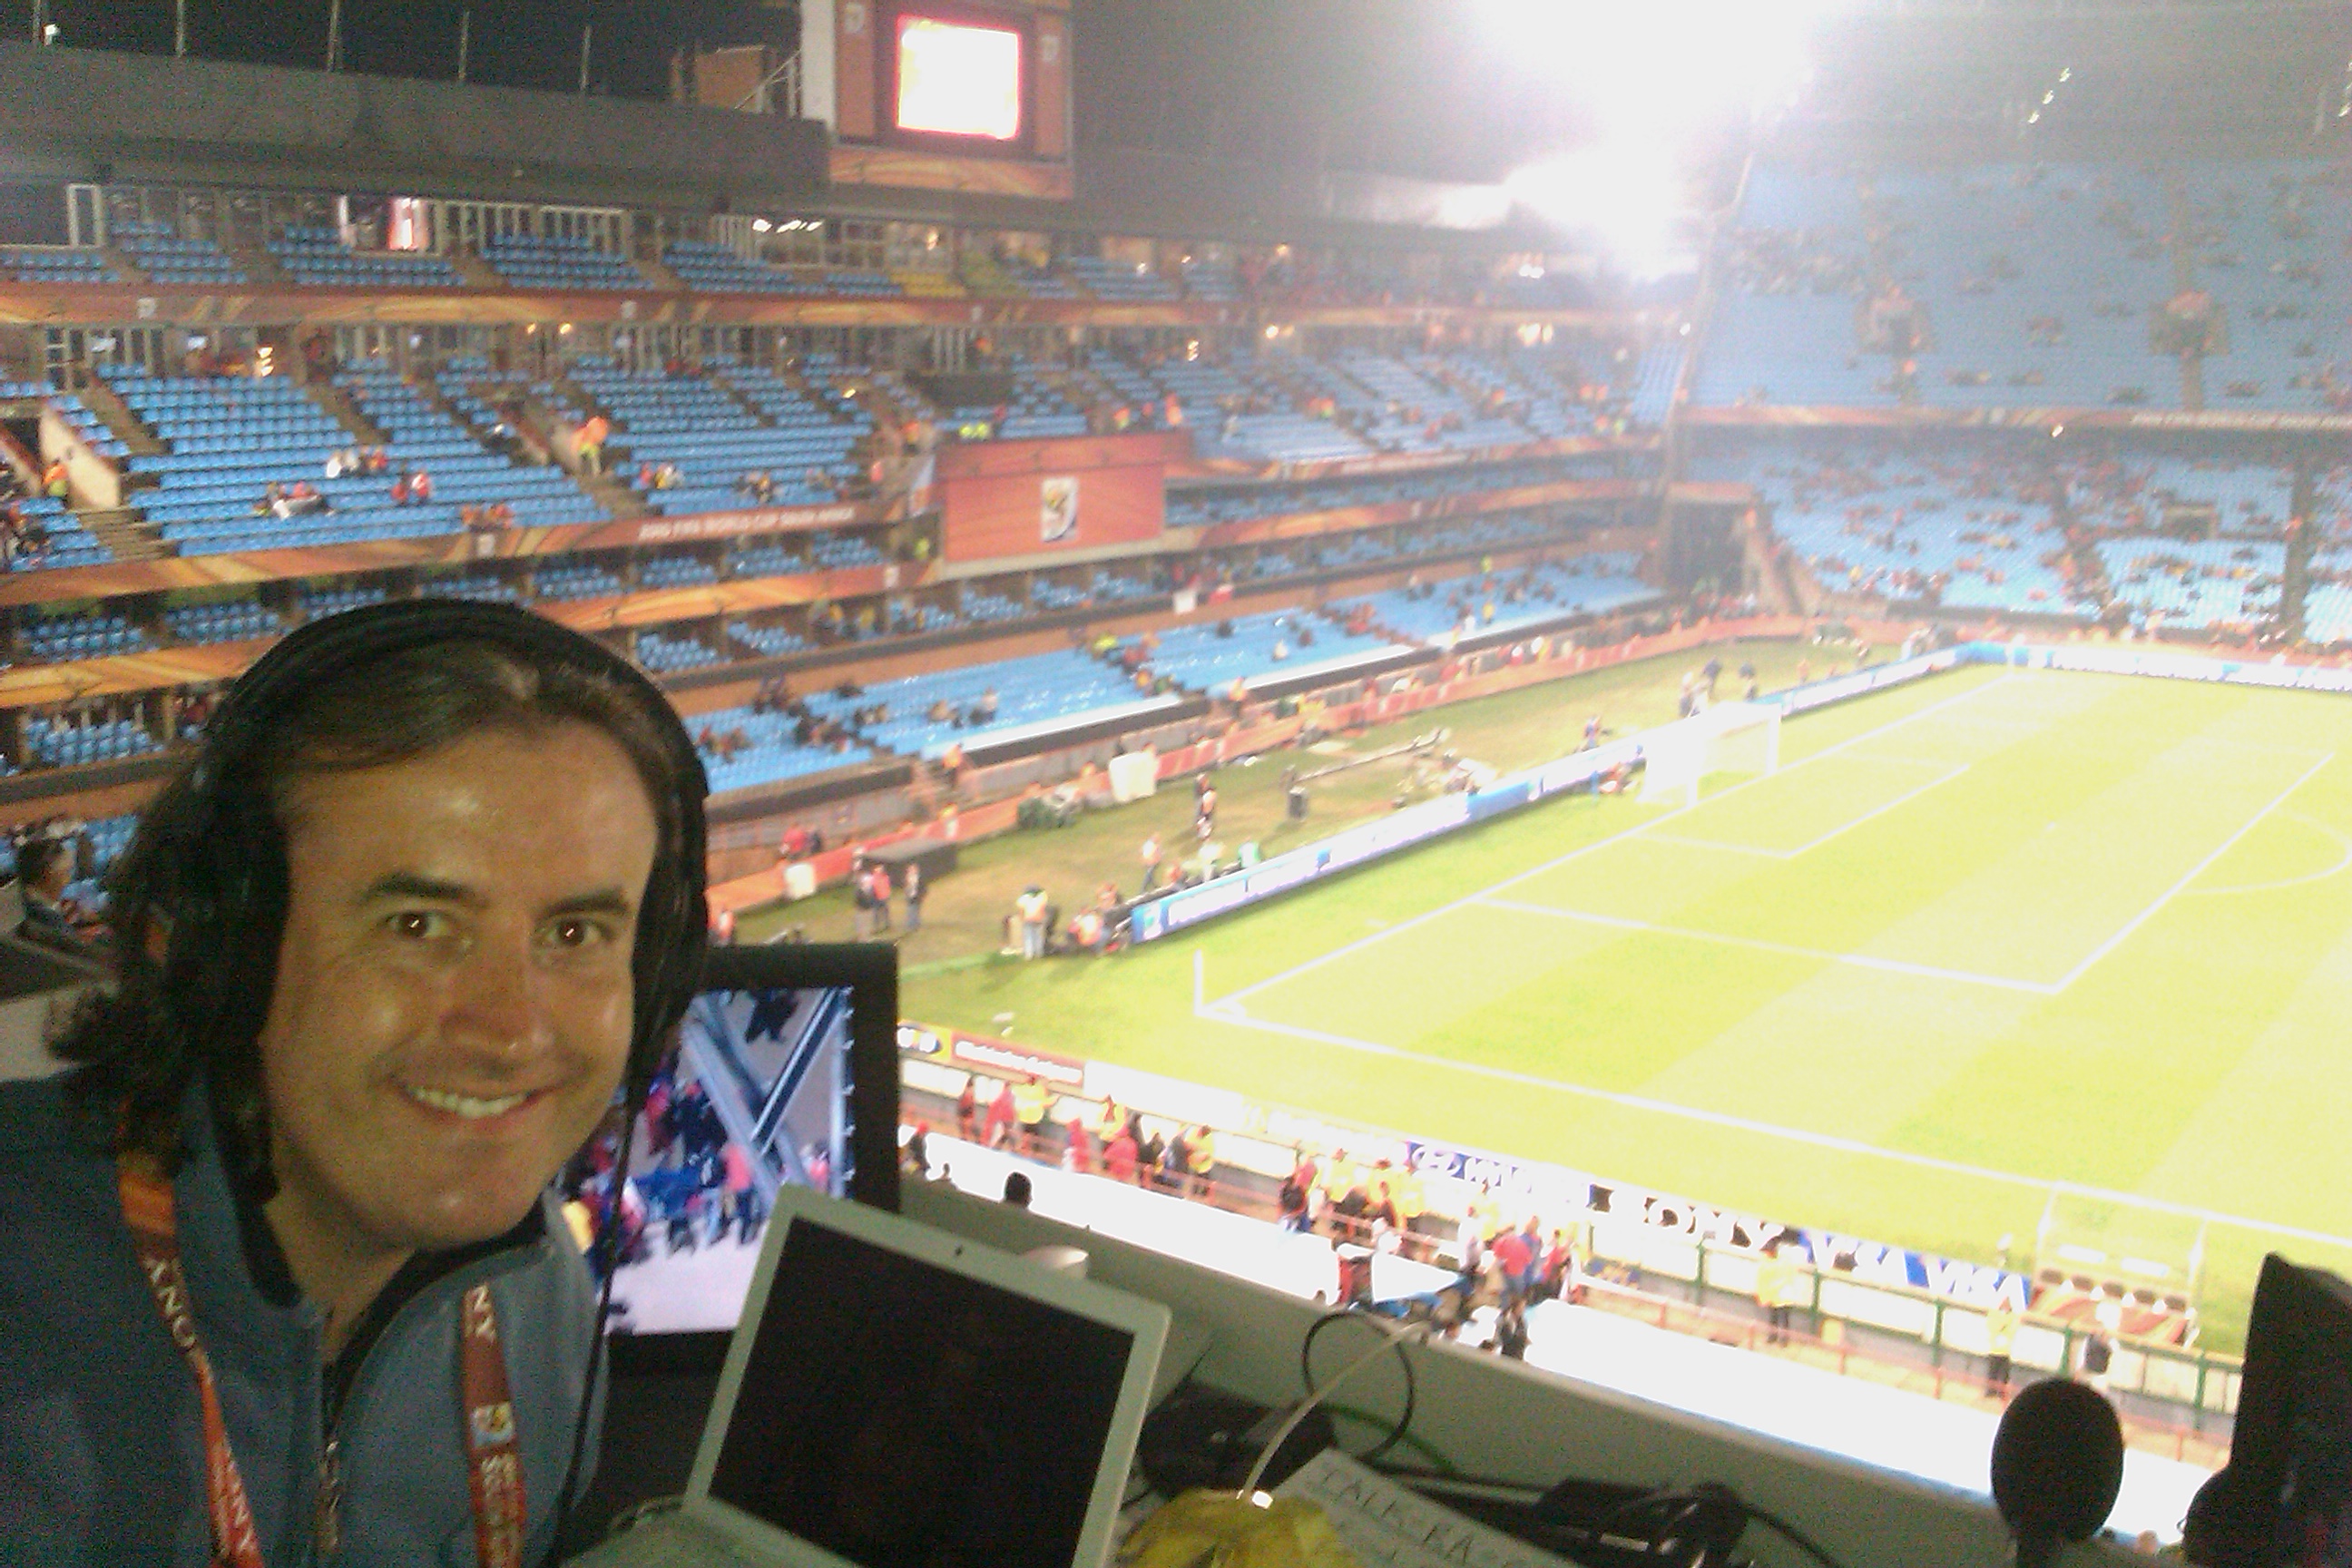 Setting up in Pretoria ahead of Chile v Spain - thermals in full effect!